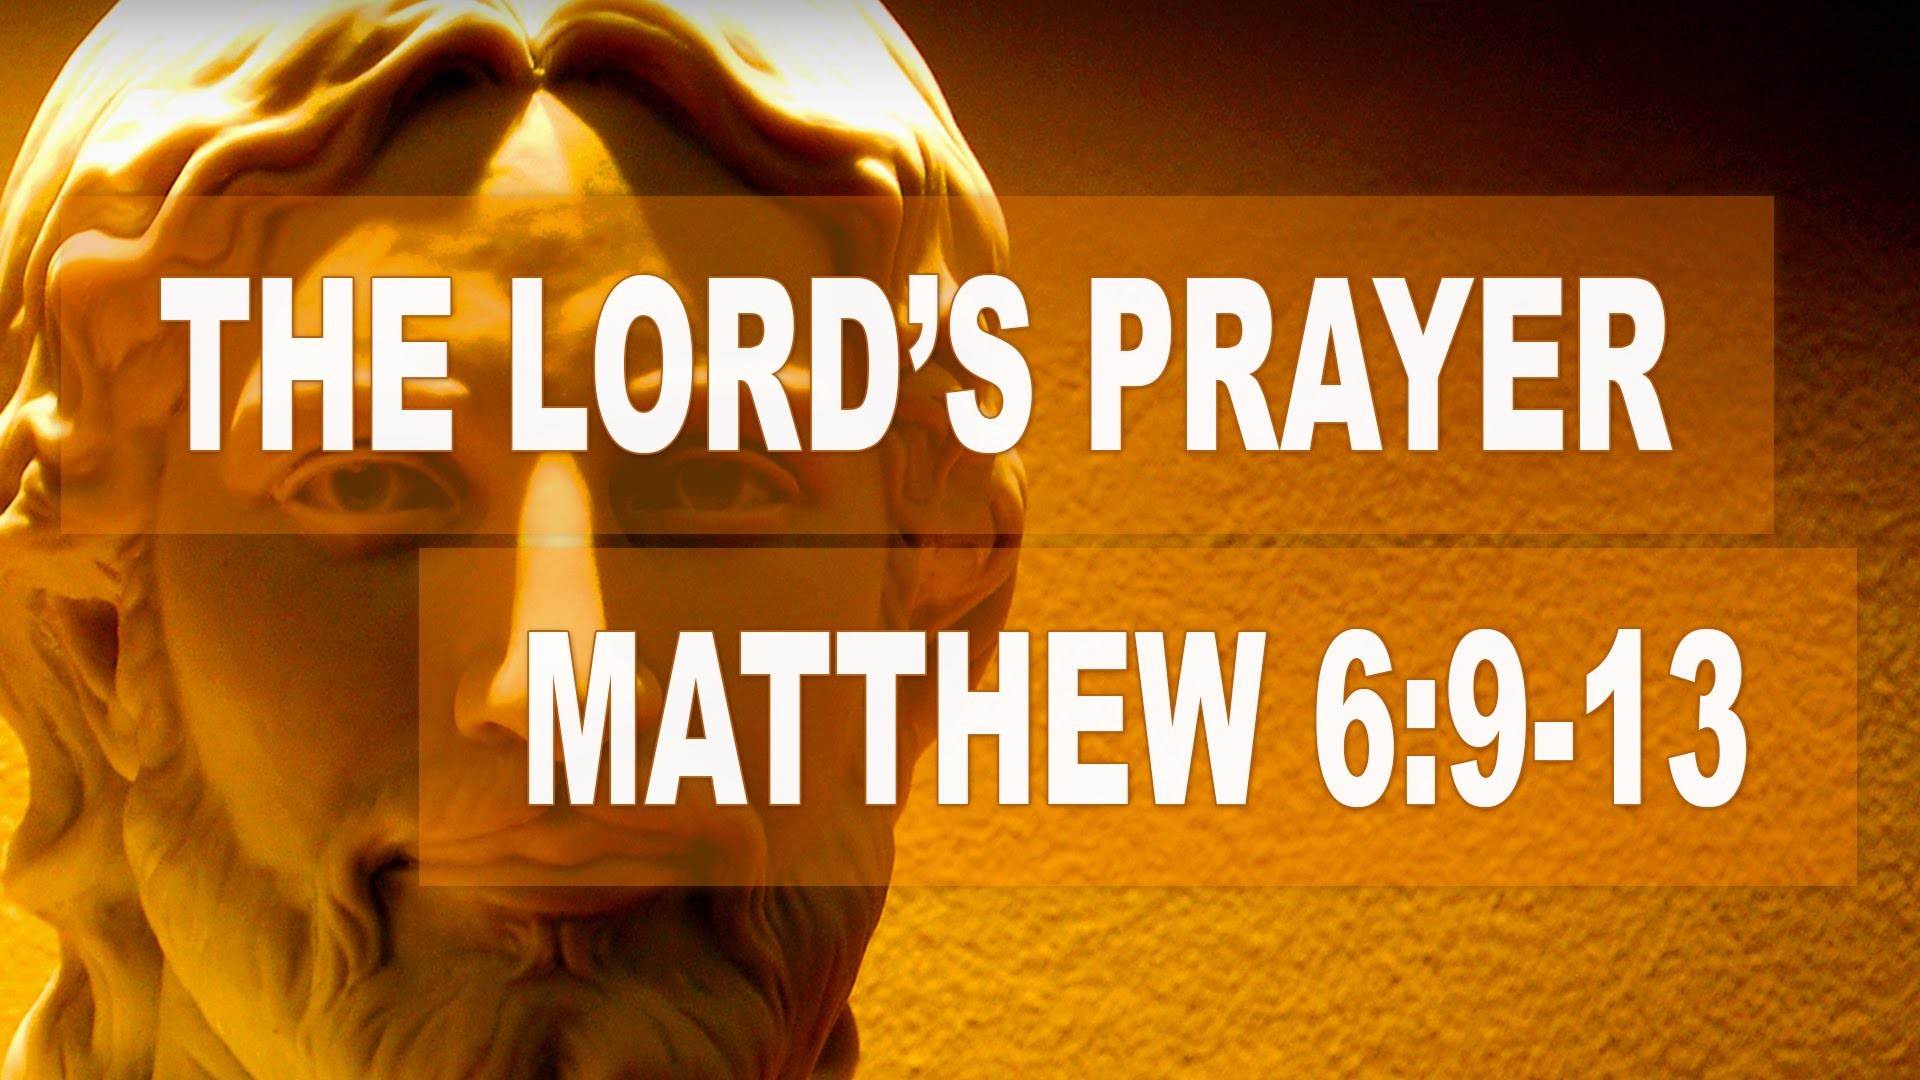 1920x1080 The Lord's Prayer - Our Father (Matthew 6:9-13)